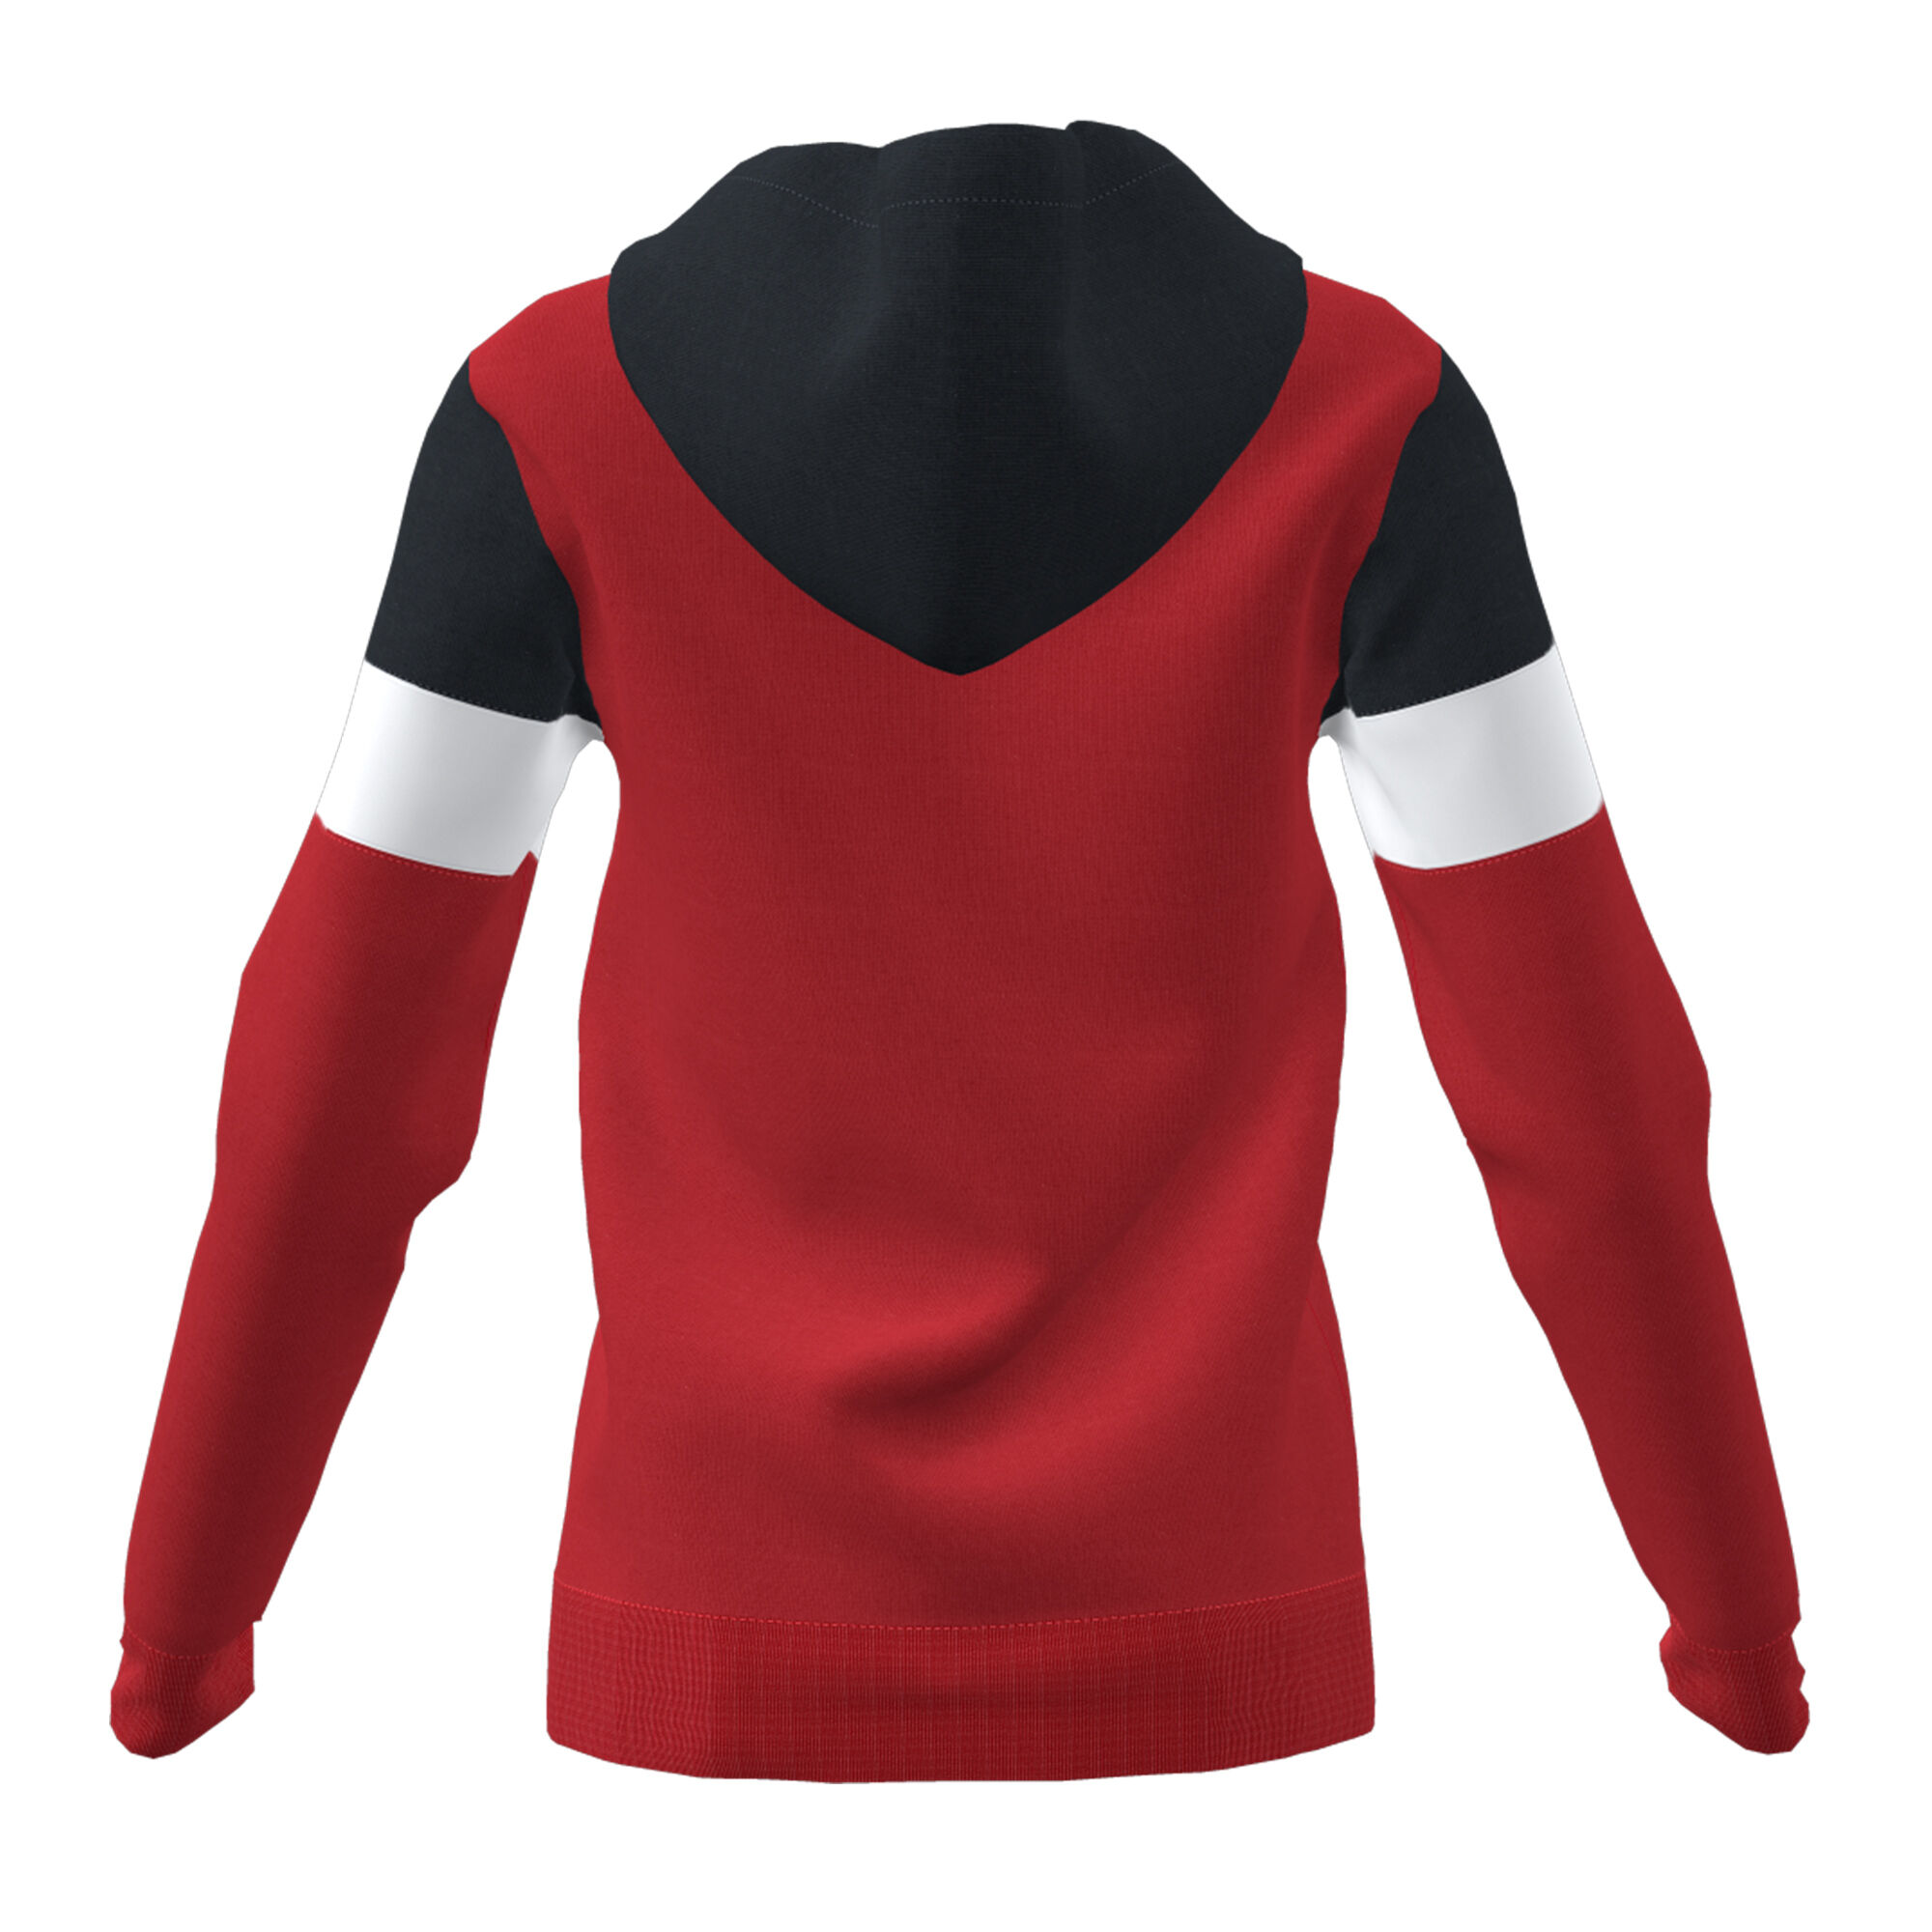 HOODED JACKET WOMAN CREW IV RED BLACK WHITE